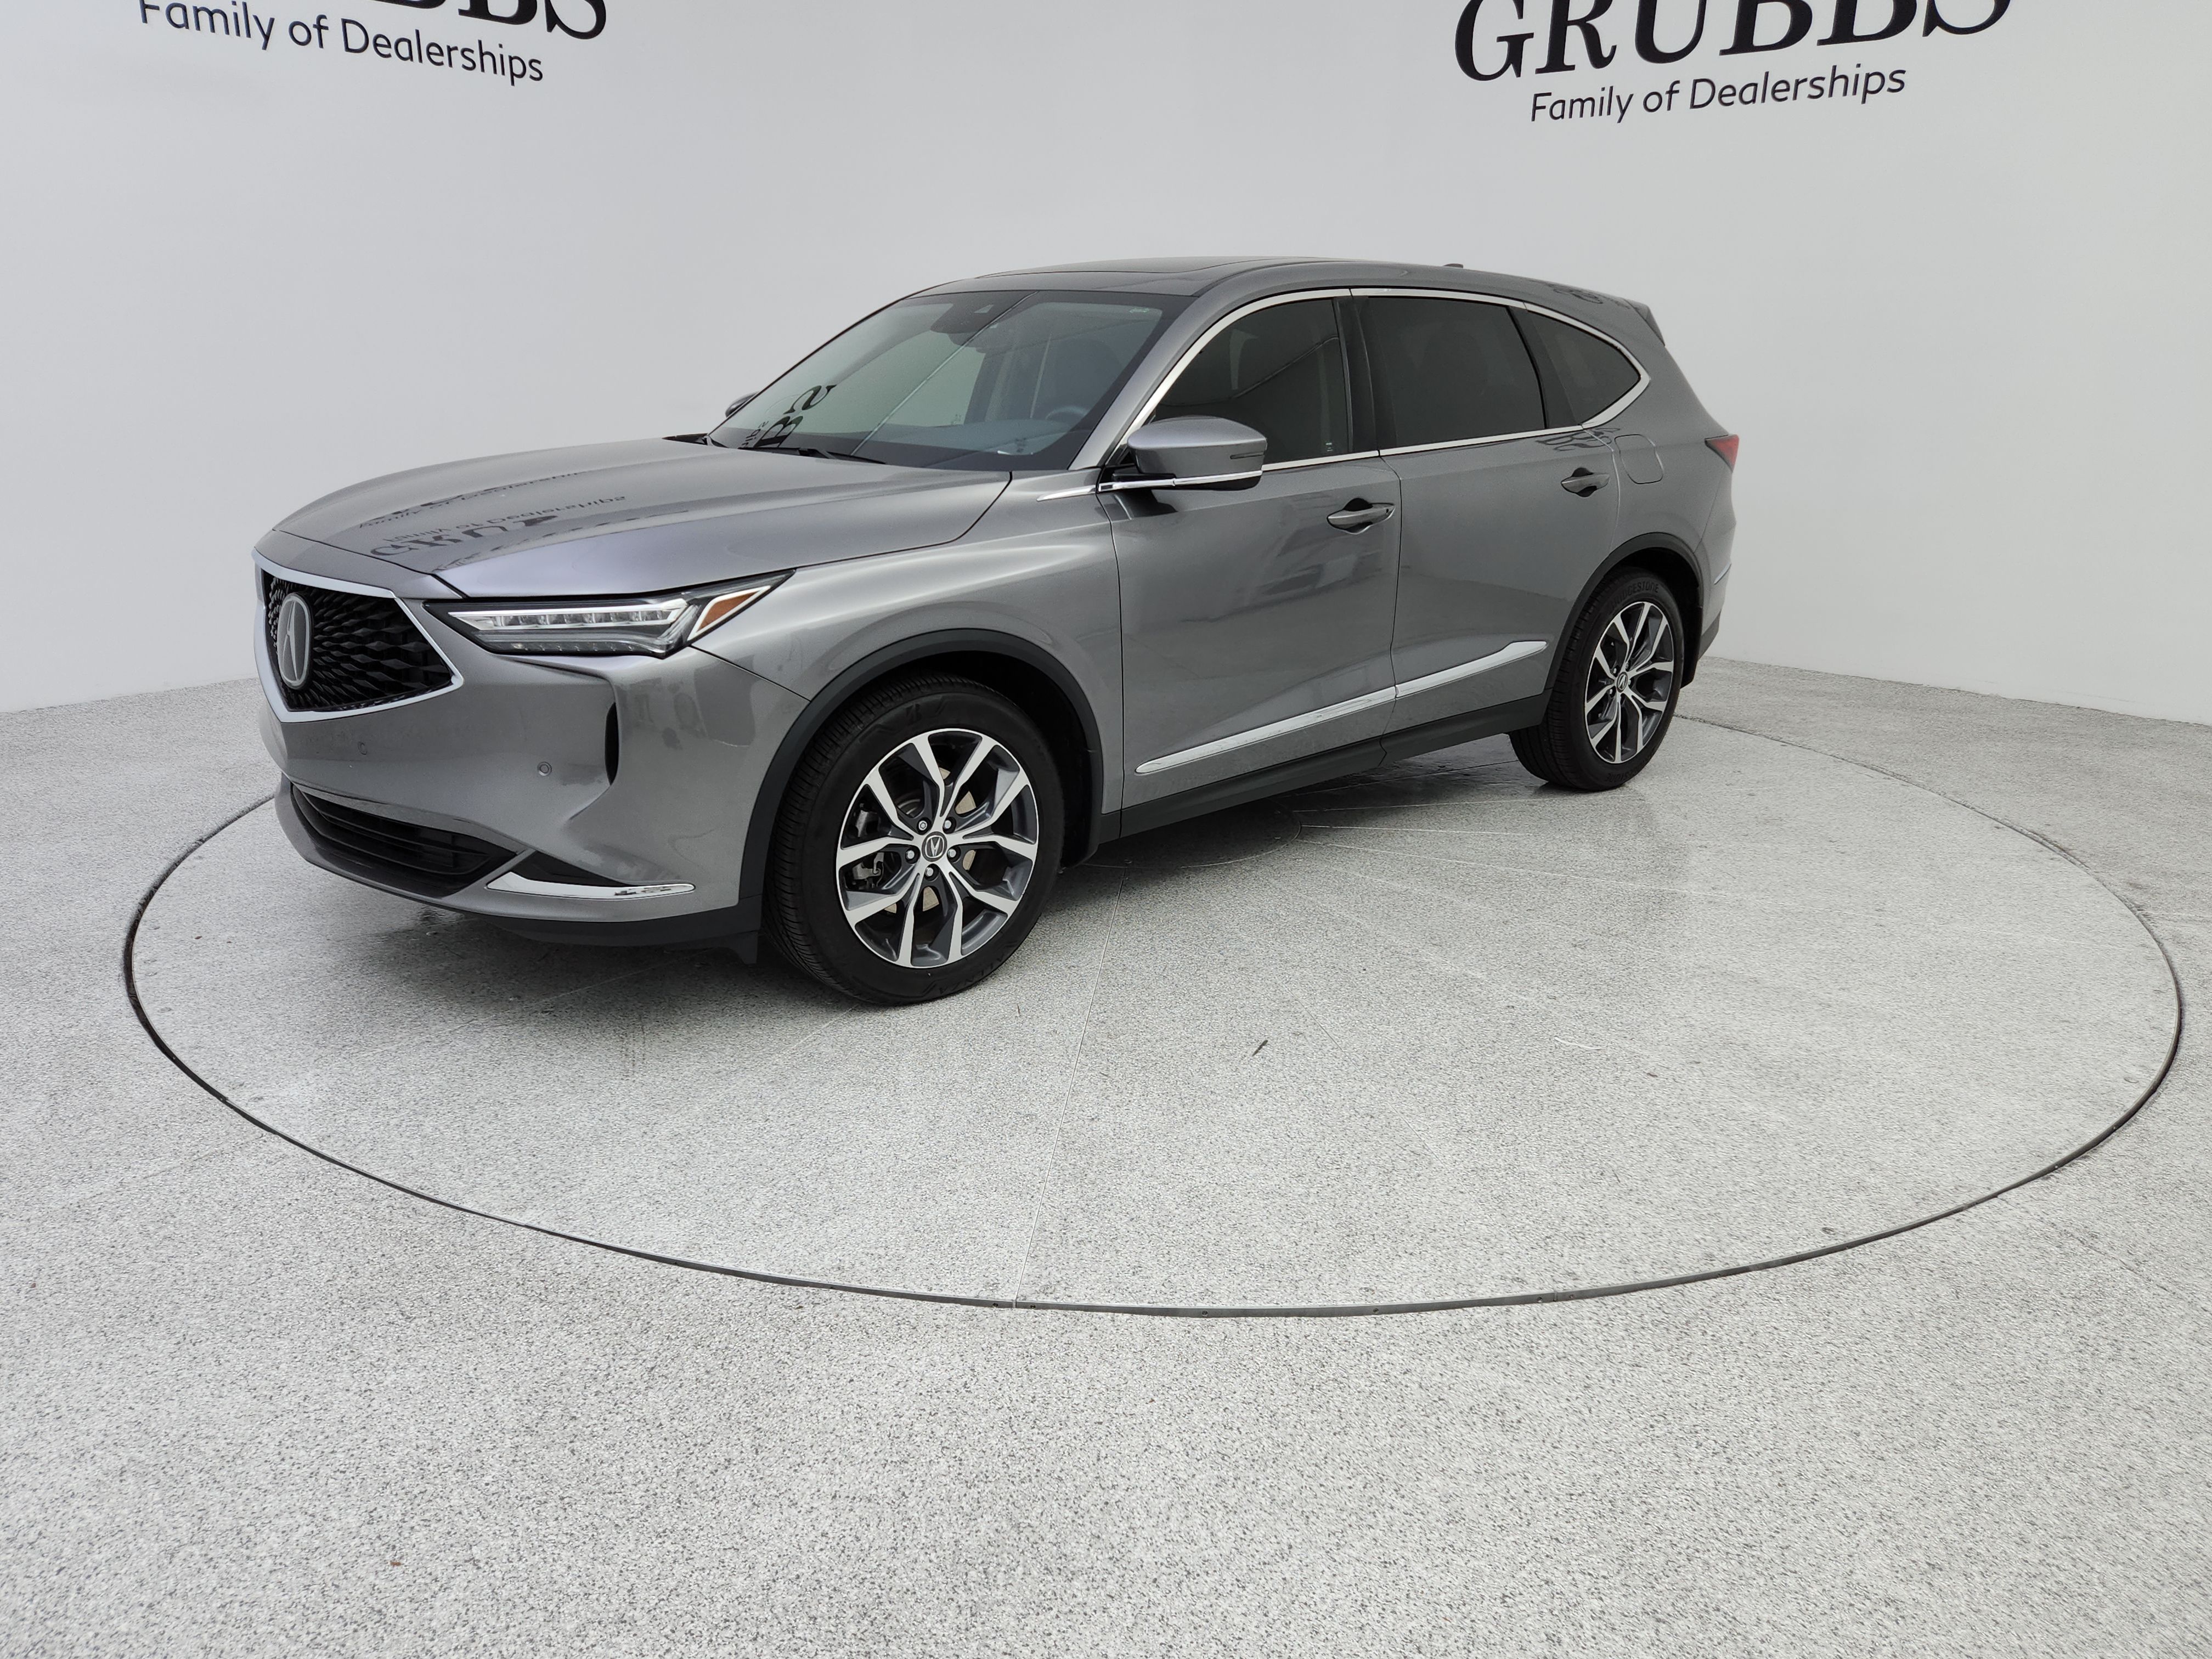 Used 2023 Gray Acura MDX For Sale in Grapevine, TX - GRUBBS 